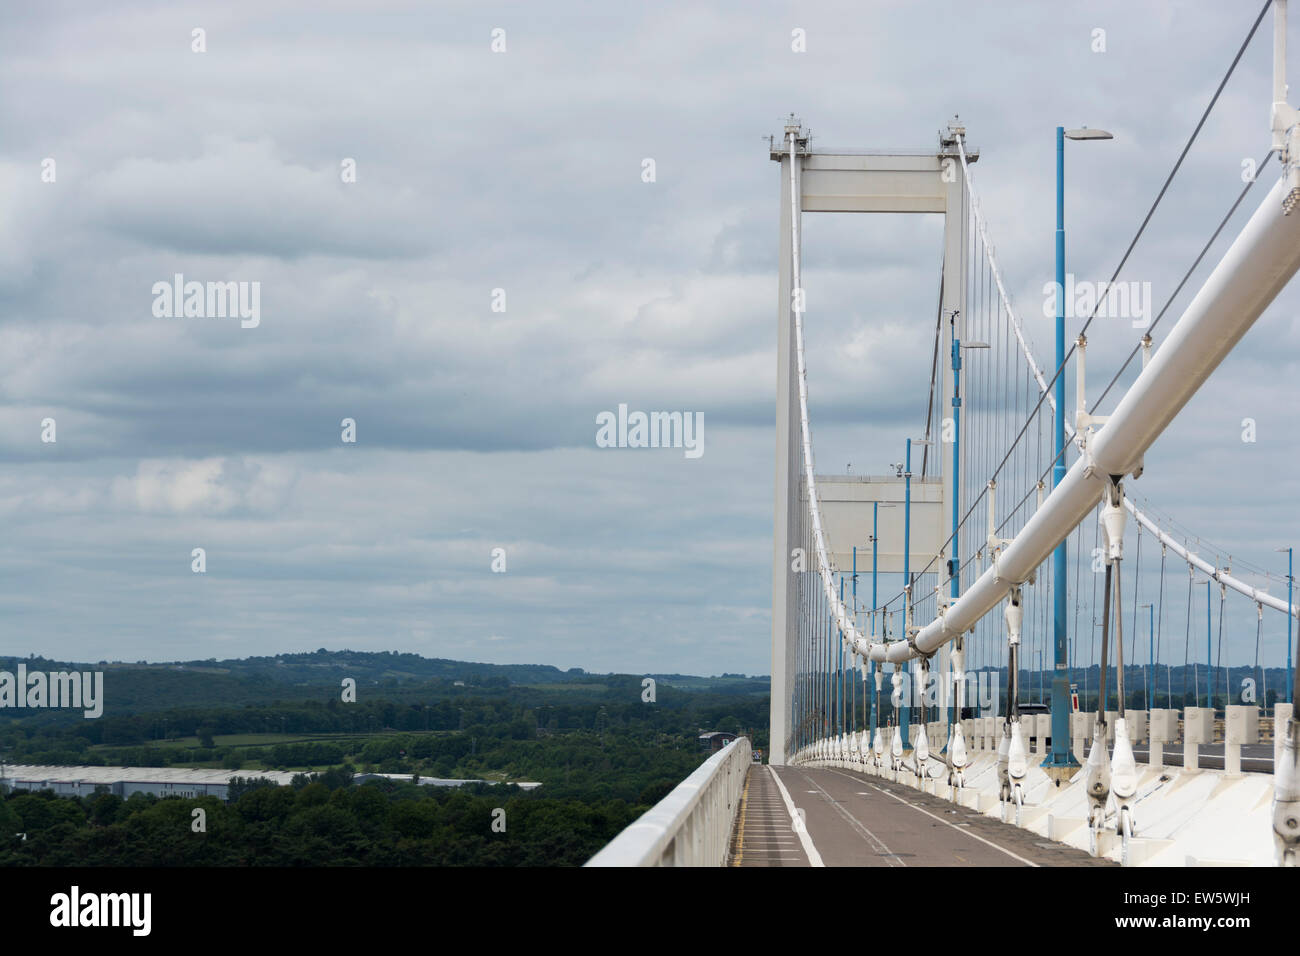 The Severn Bridge opened to motorway traffic in 1966 connecting England and Wales across the River Severn. Stock Photo